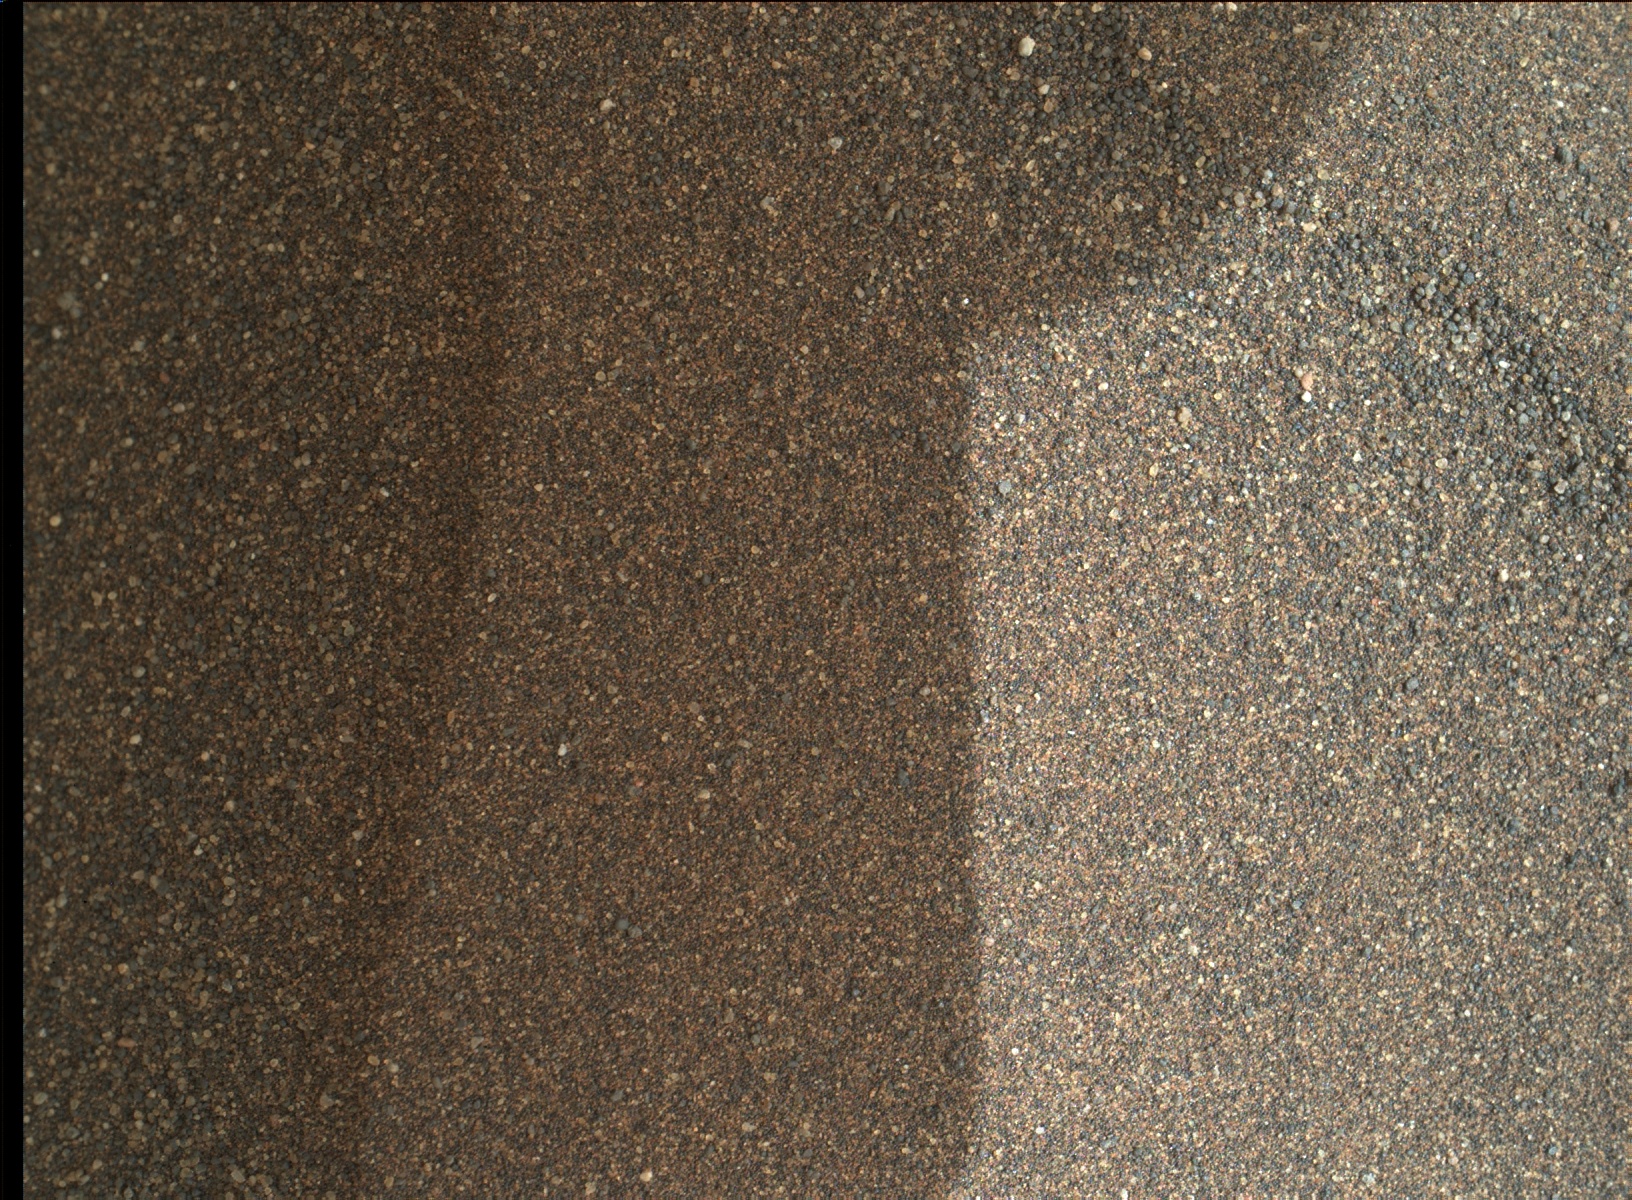 Nasa's Mars rover Curiosity acquired this image using its Mars Hand Lens Imager (MAHLI) on Sol 1604